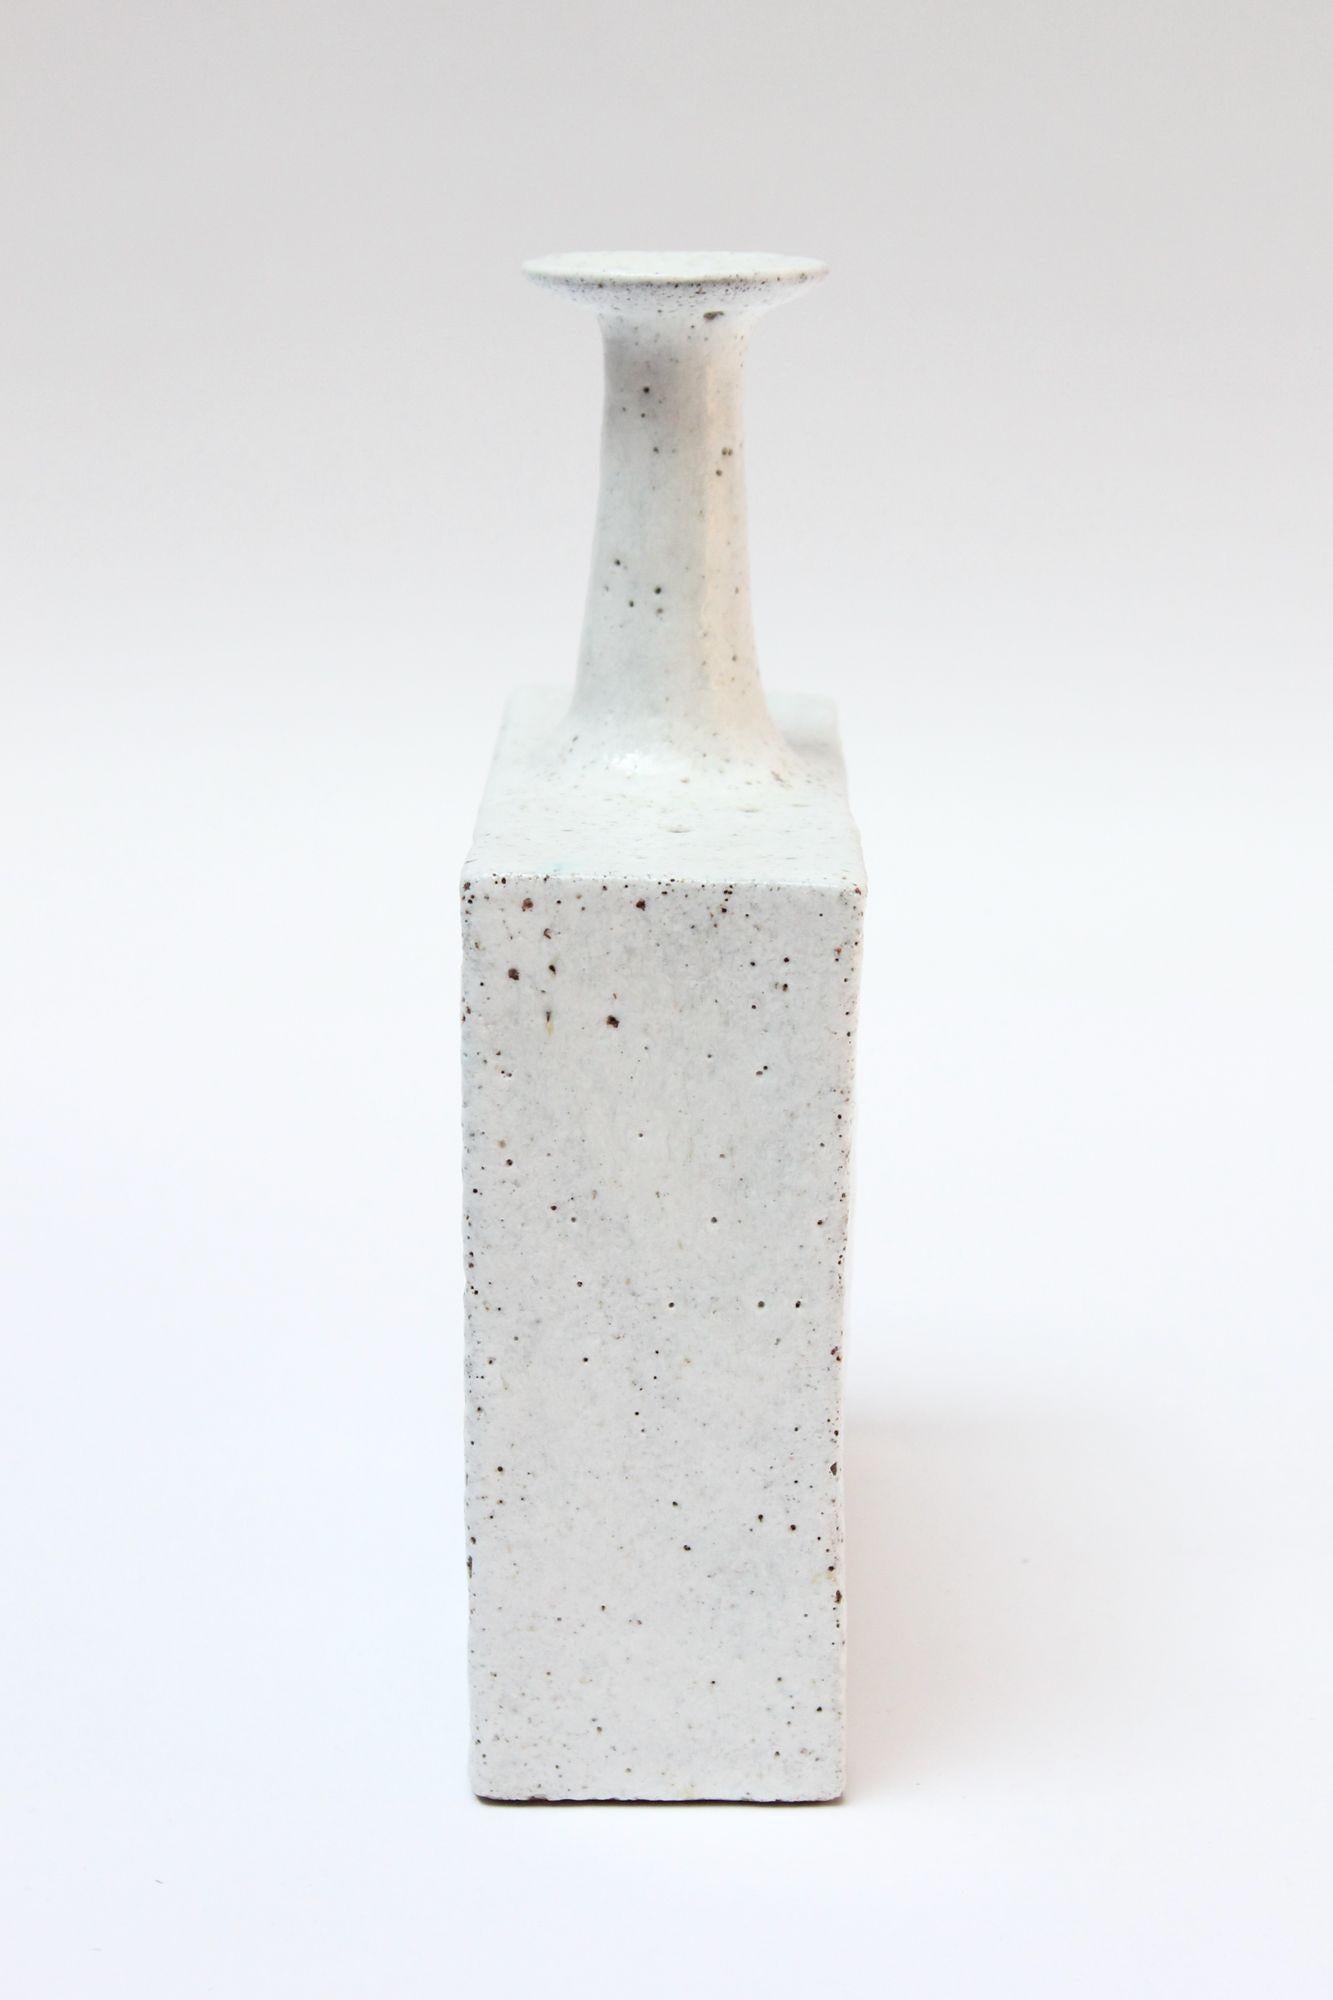 Italian Modern stoneware vase by Bruno Gambone with rectangular base supporting an elegant, tapered neck and flared aperture (ca. late 1950s, Italy). White glaze with specks of turquoise in a few places, as shown. Porous form, giving the piece a